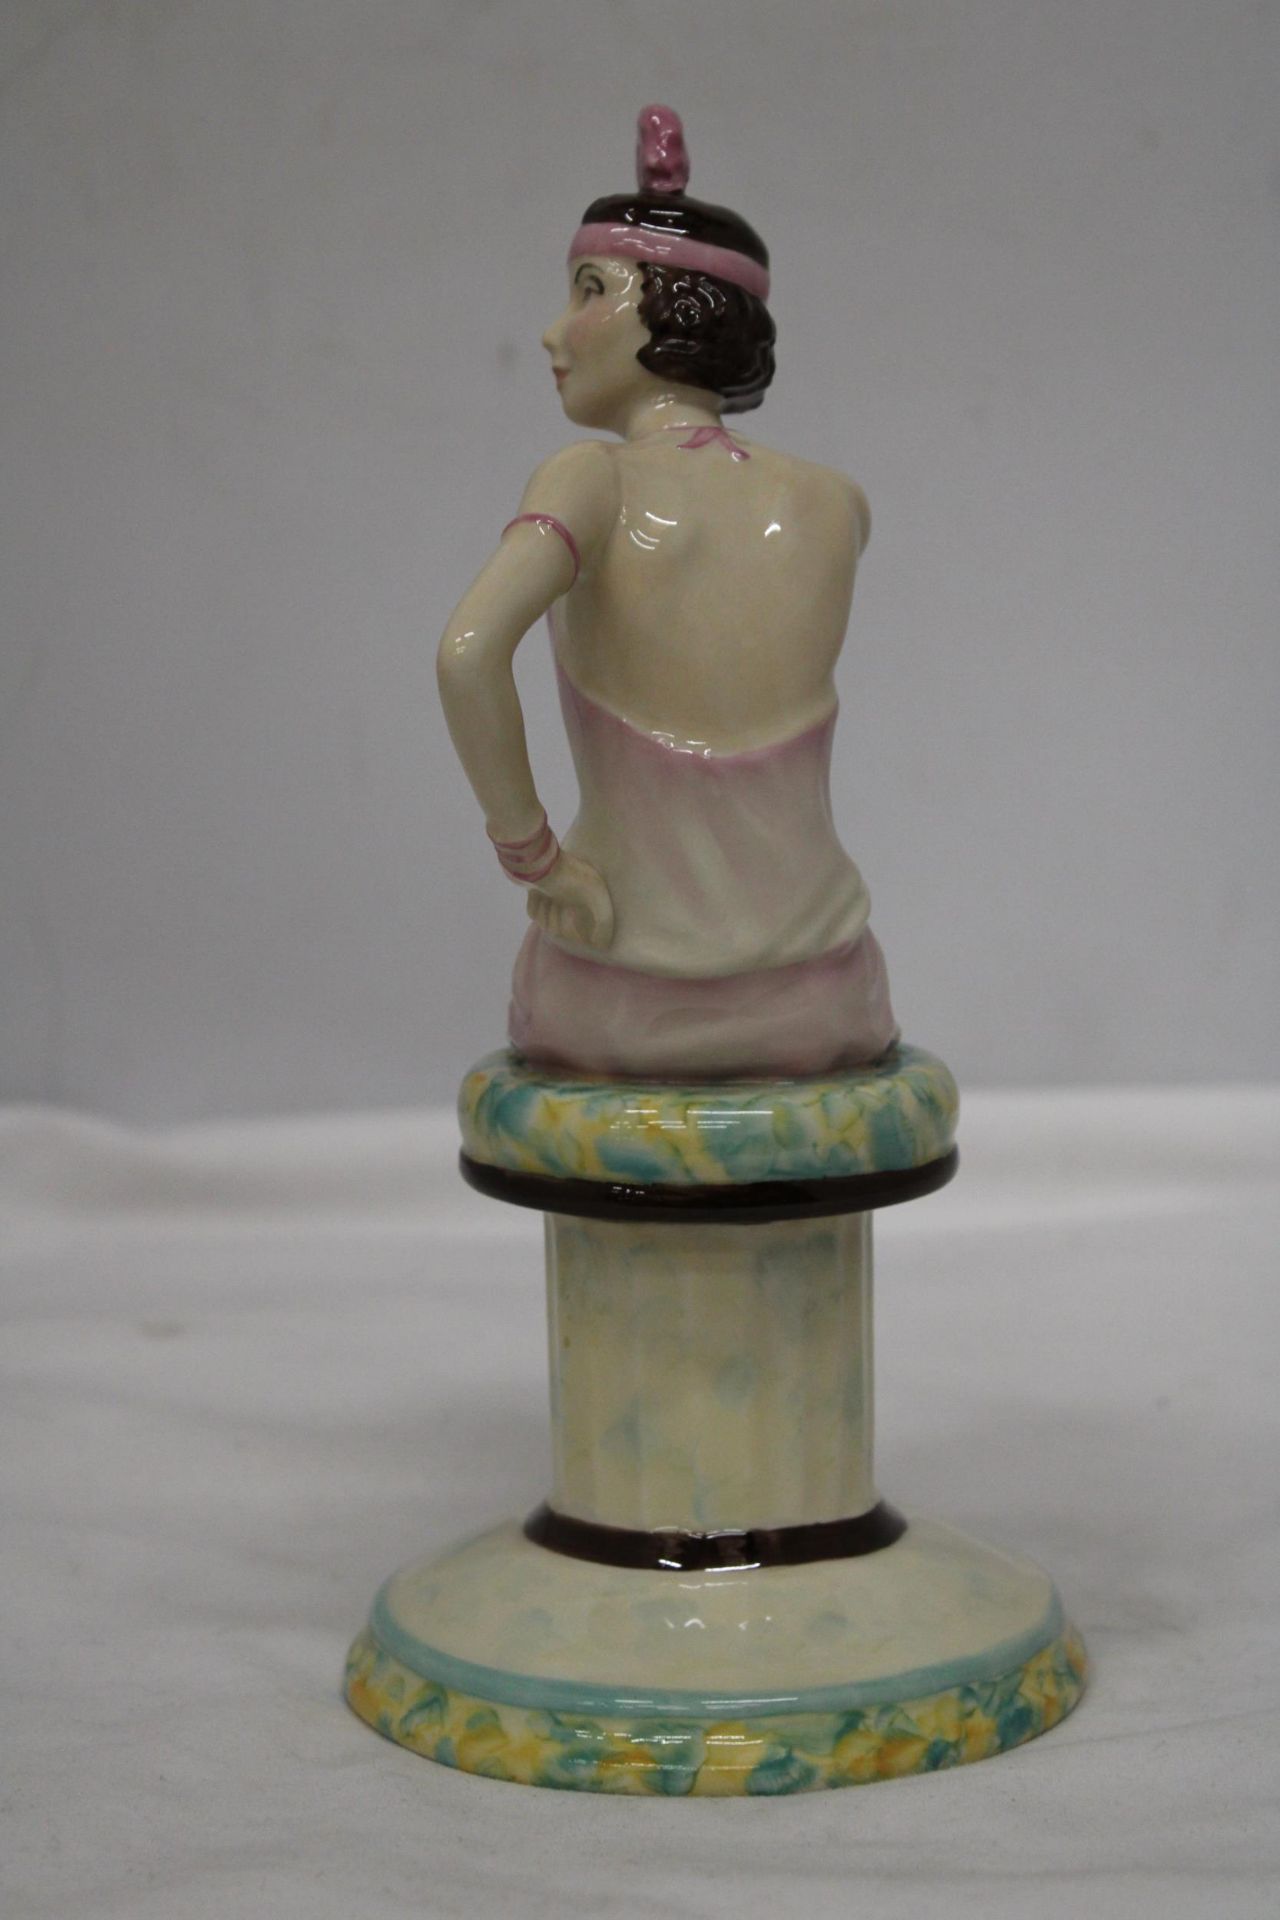 A LIMITED EDITIONM PEGGY DAVIS 'DANIELLE' FIGURINE (SIGNED IN GOLD) - Image 3 of 5